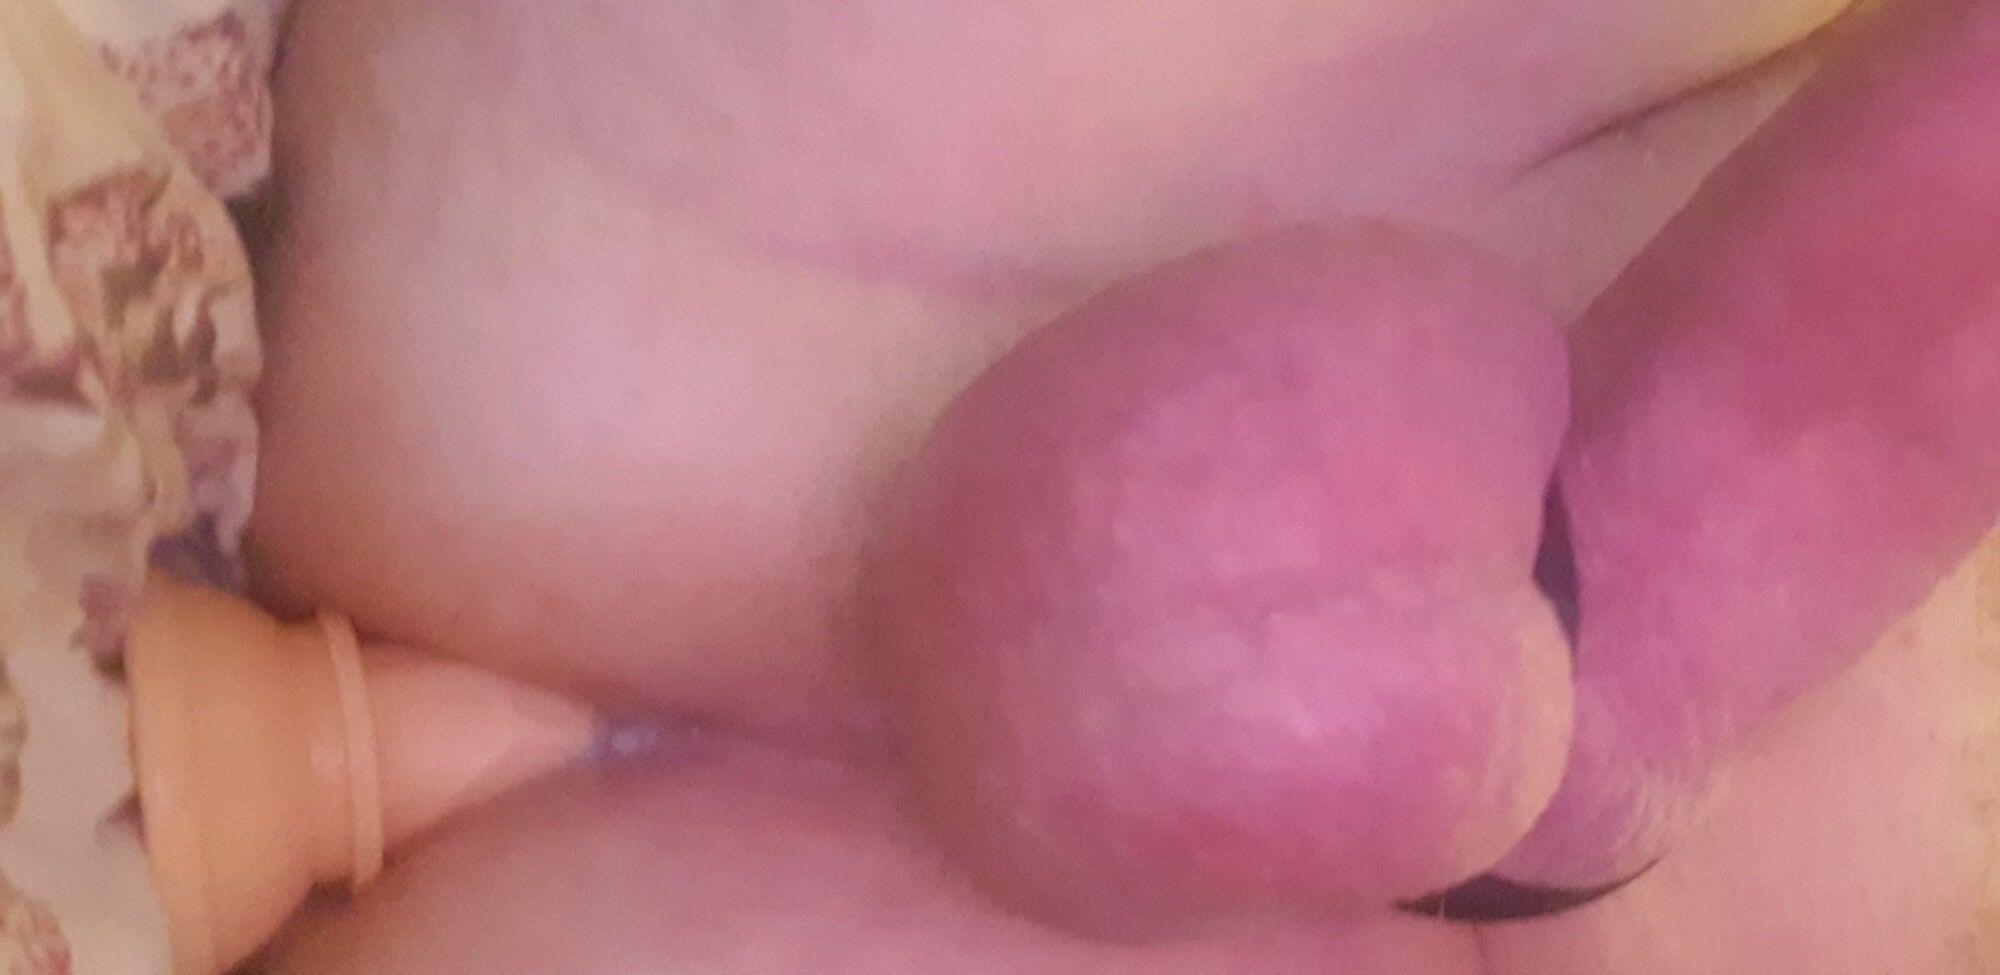 lying and playing with my little cock and riding a dildo in 